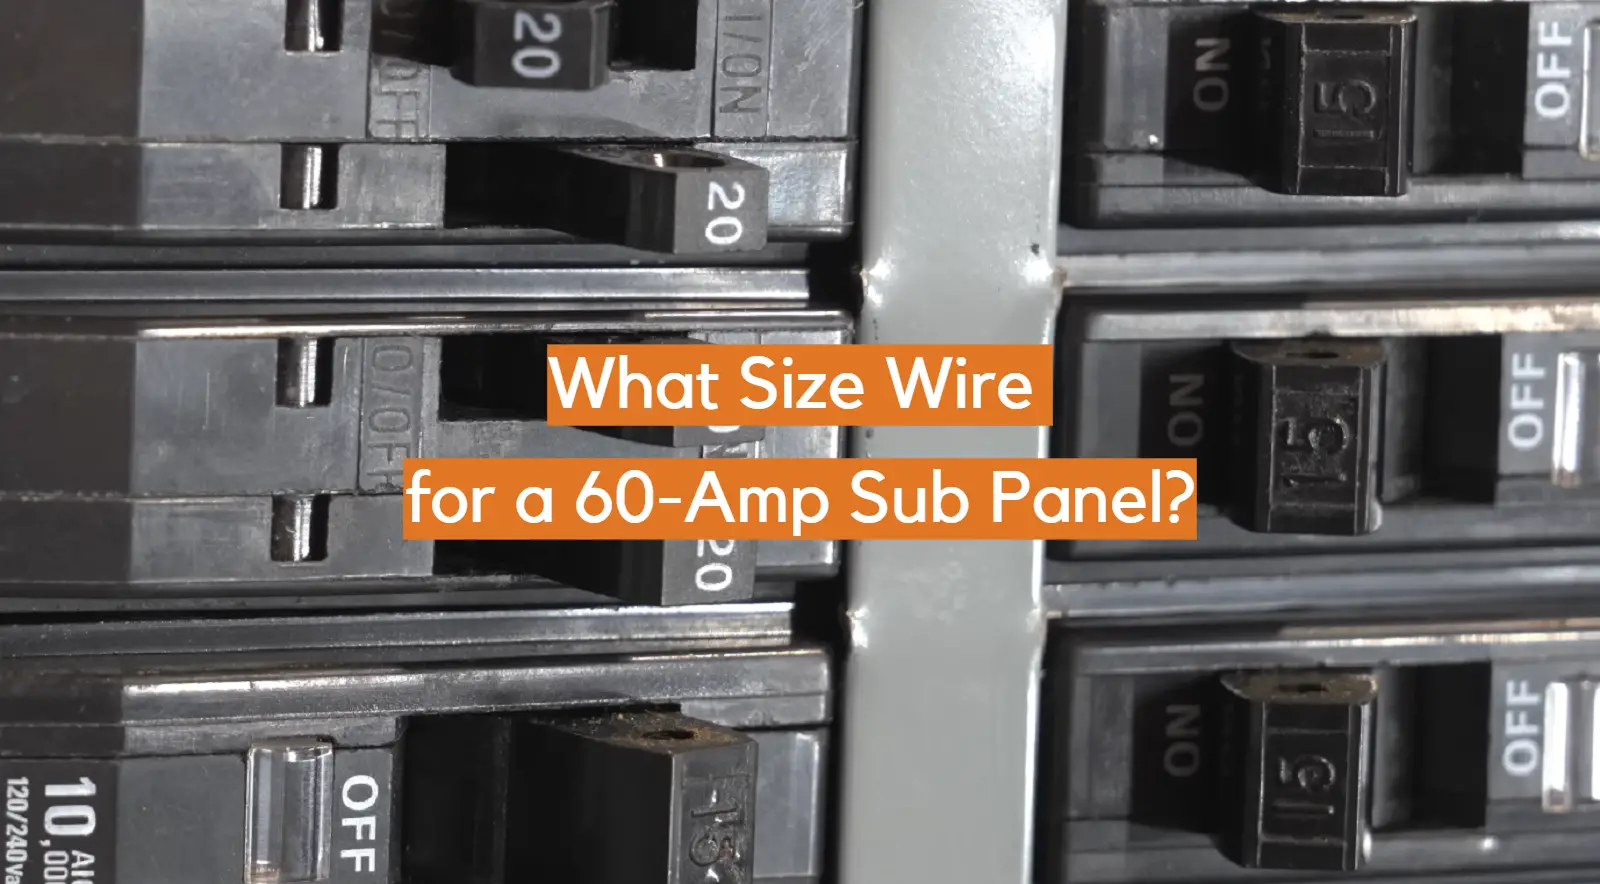 What Size Wire for a 60-Amp Sub Panel?